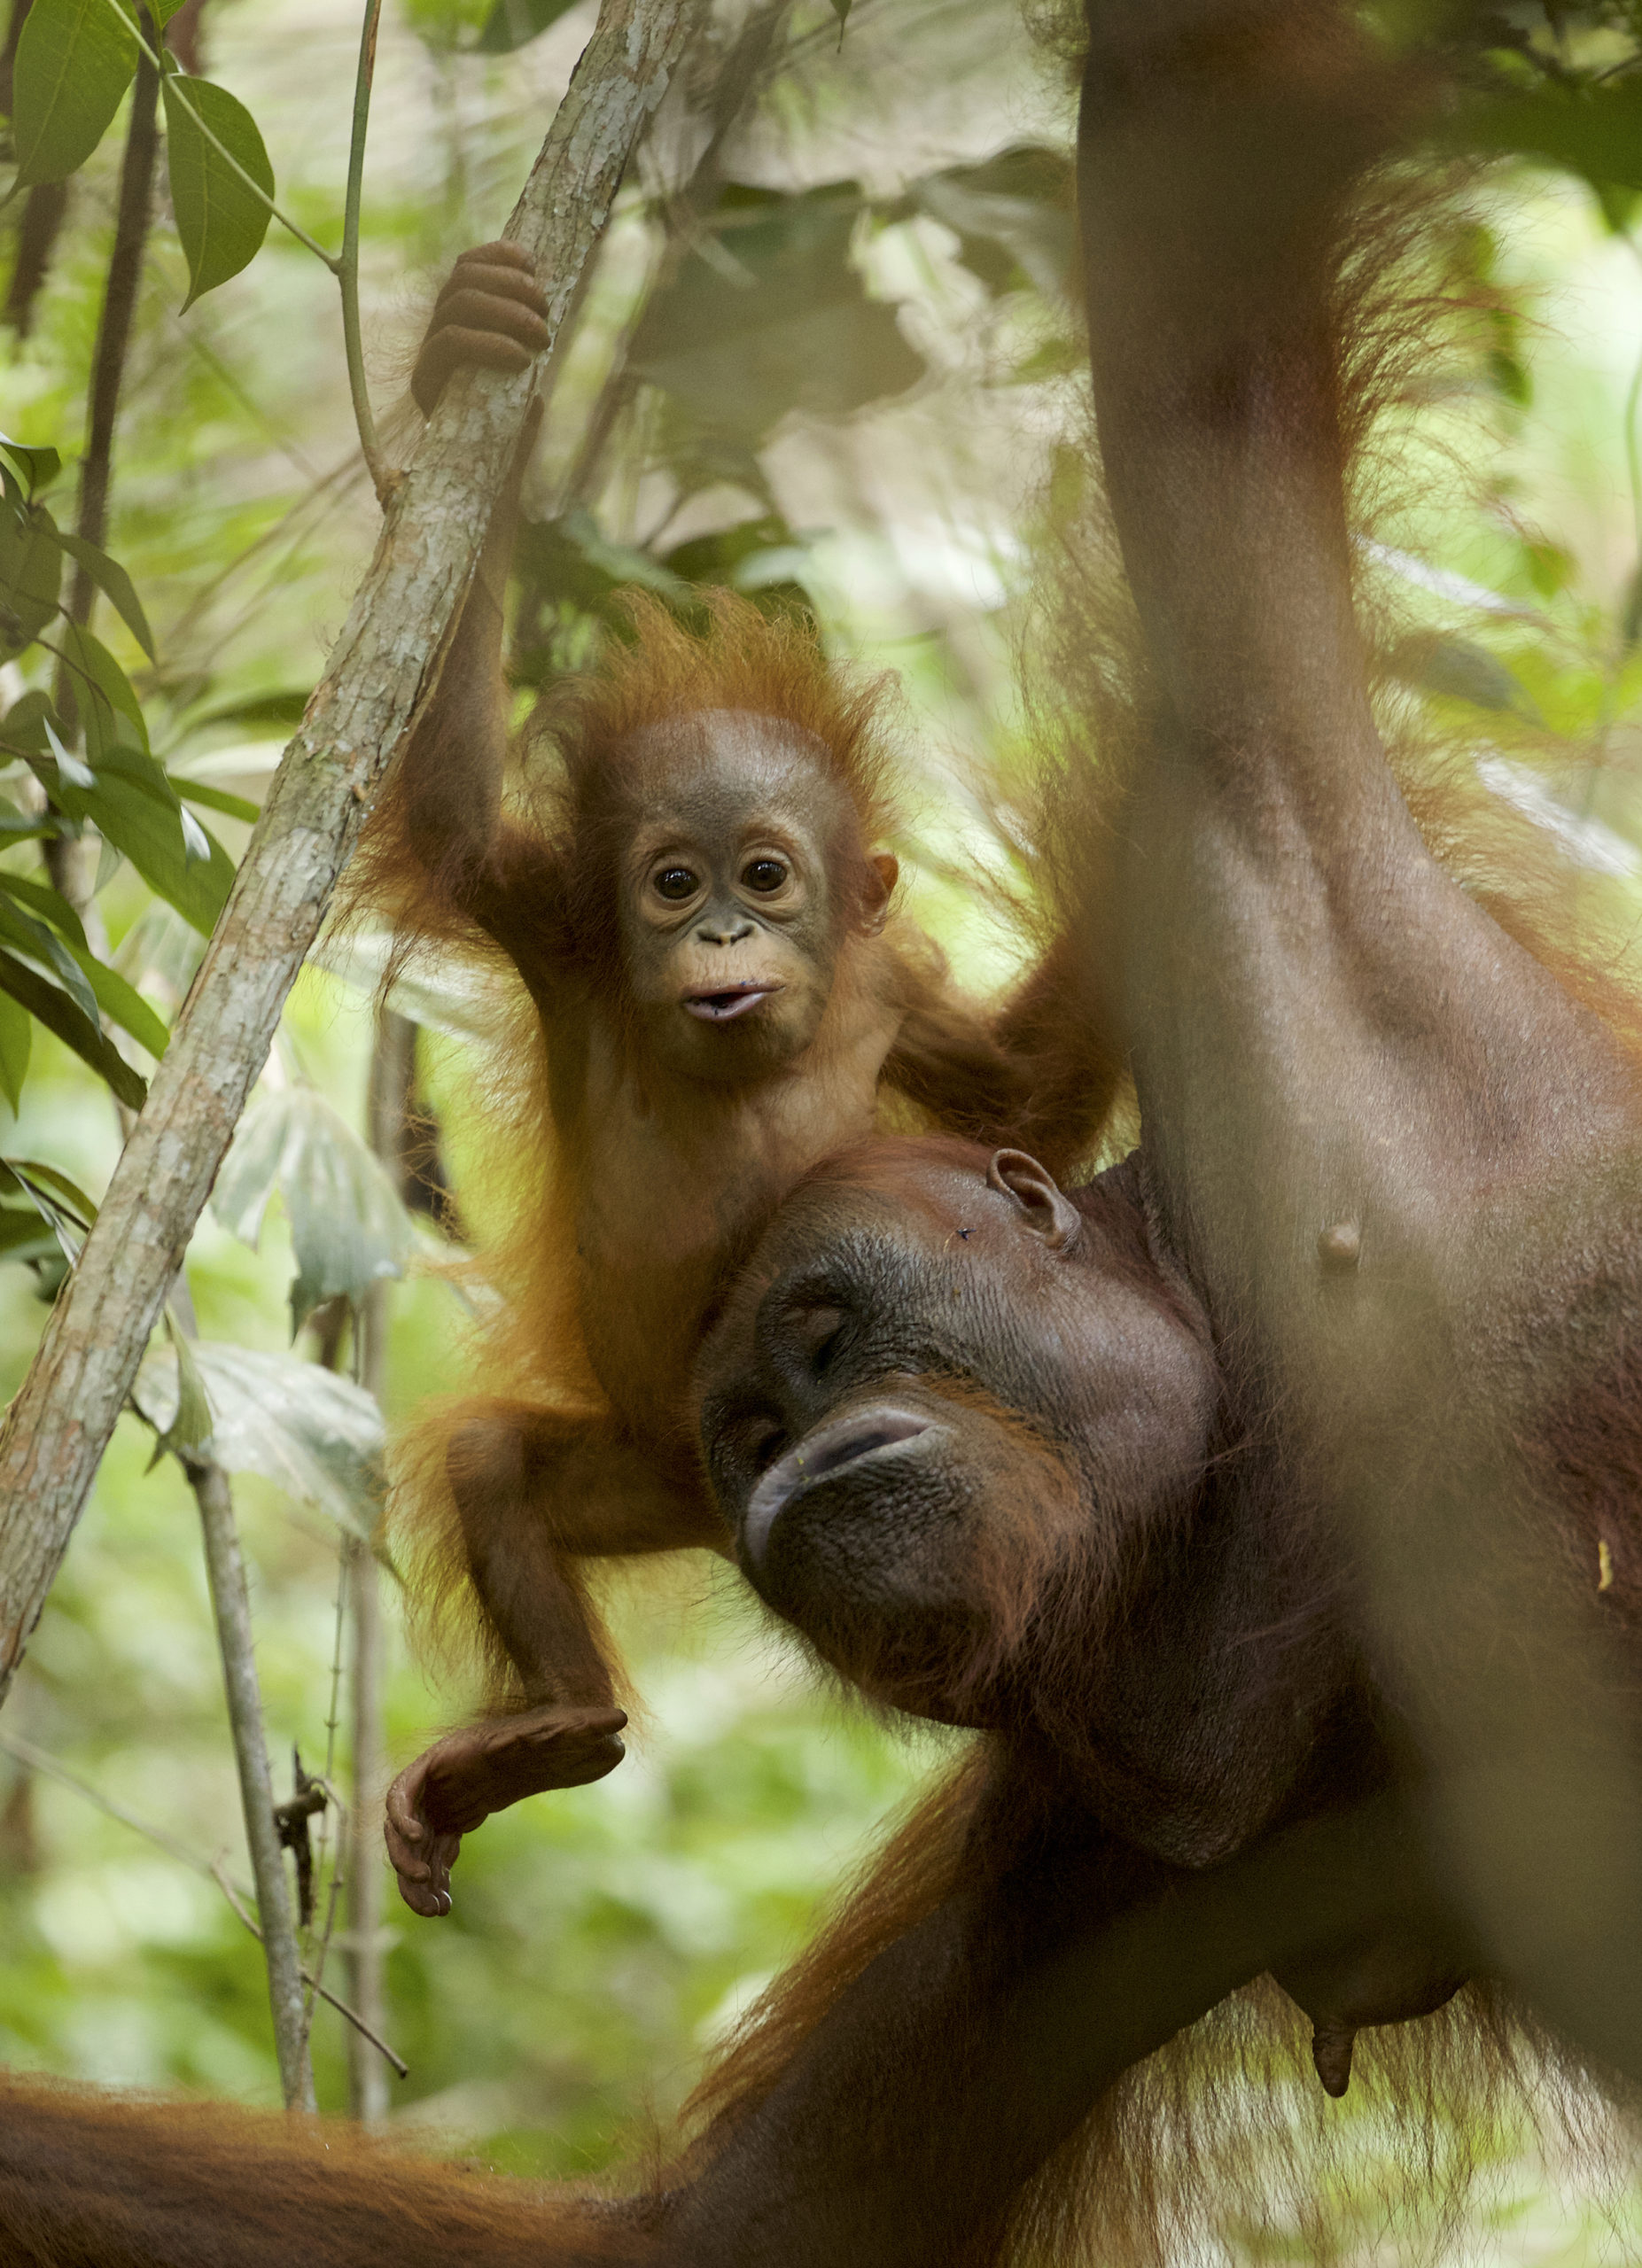 Baby Orangutans Rely On Their Mothers’ Milk For Almost A Decade